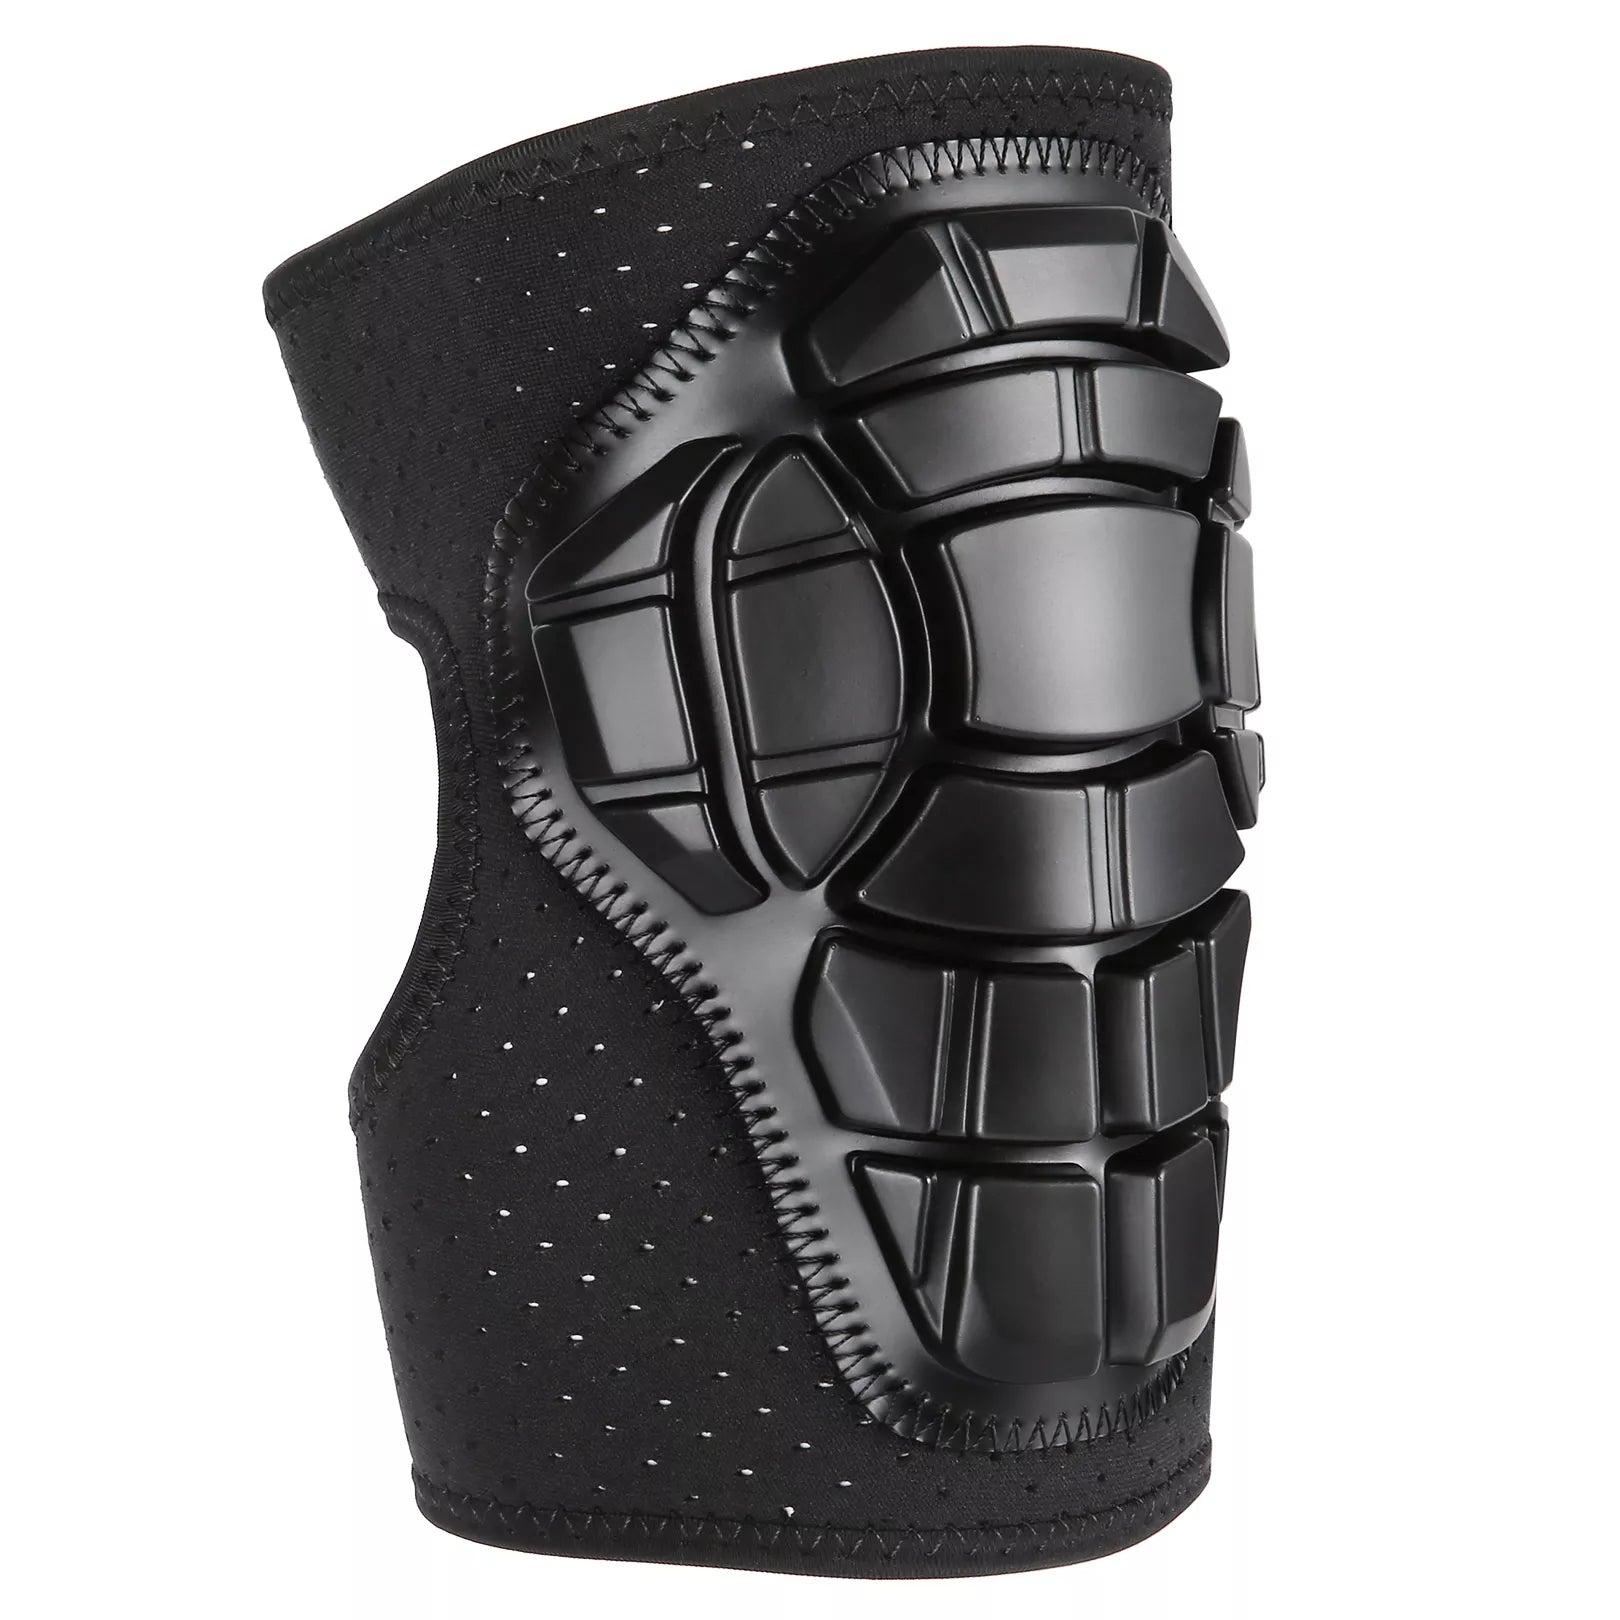 Designed to improve riding safety and comfort, the Commuting Electric Bike Anti-Impact Elbow Guards feature a honeycomb soft bumper to disperse impact. They are made from premium diving fabric that wicks sweat and keeps your skin dry. These elbow guards weigh 0.2 kg, are adjustable, have double straps to prevent slipping, and are made from D3O and diving fabric.